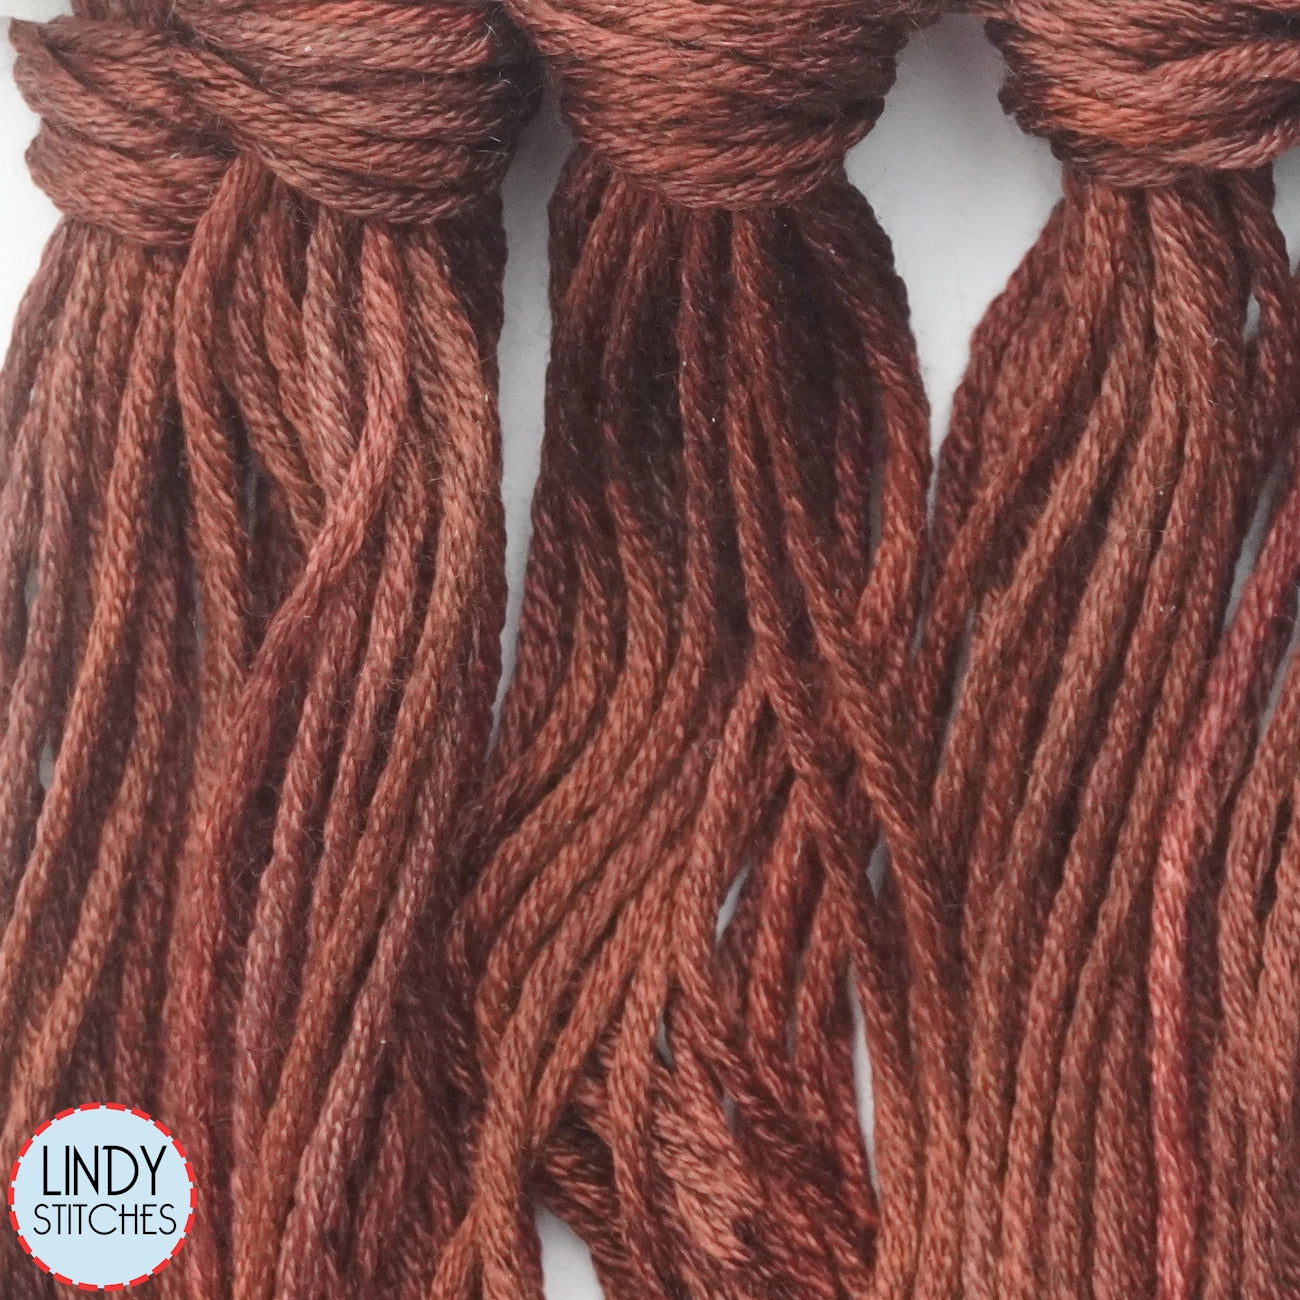 Mahogany Belle Soie Classic Colorworks 12 Strand Hand-Dyed Silk Floss